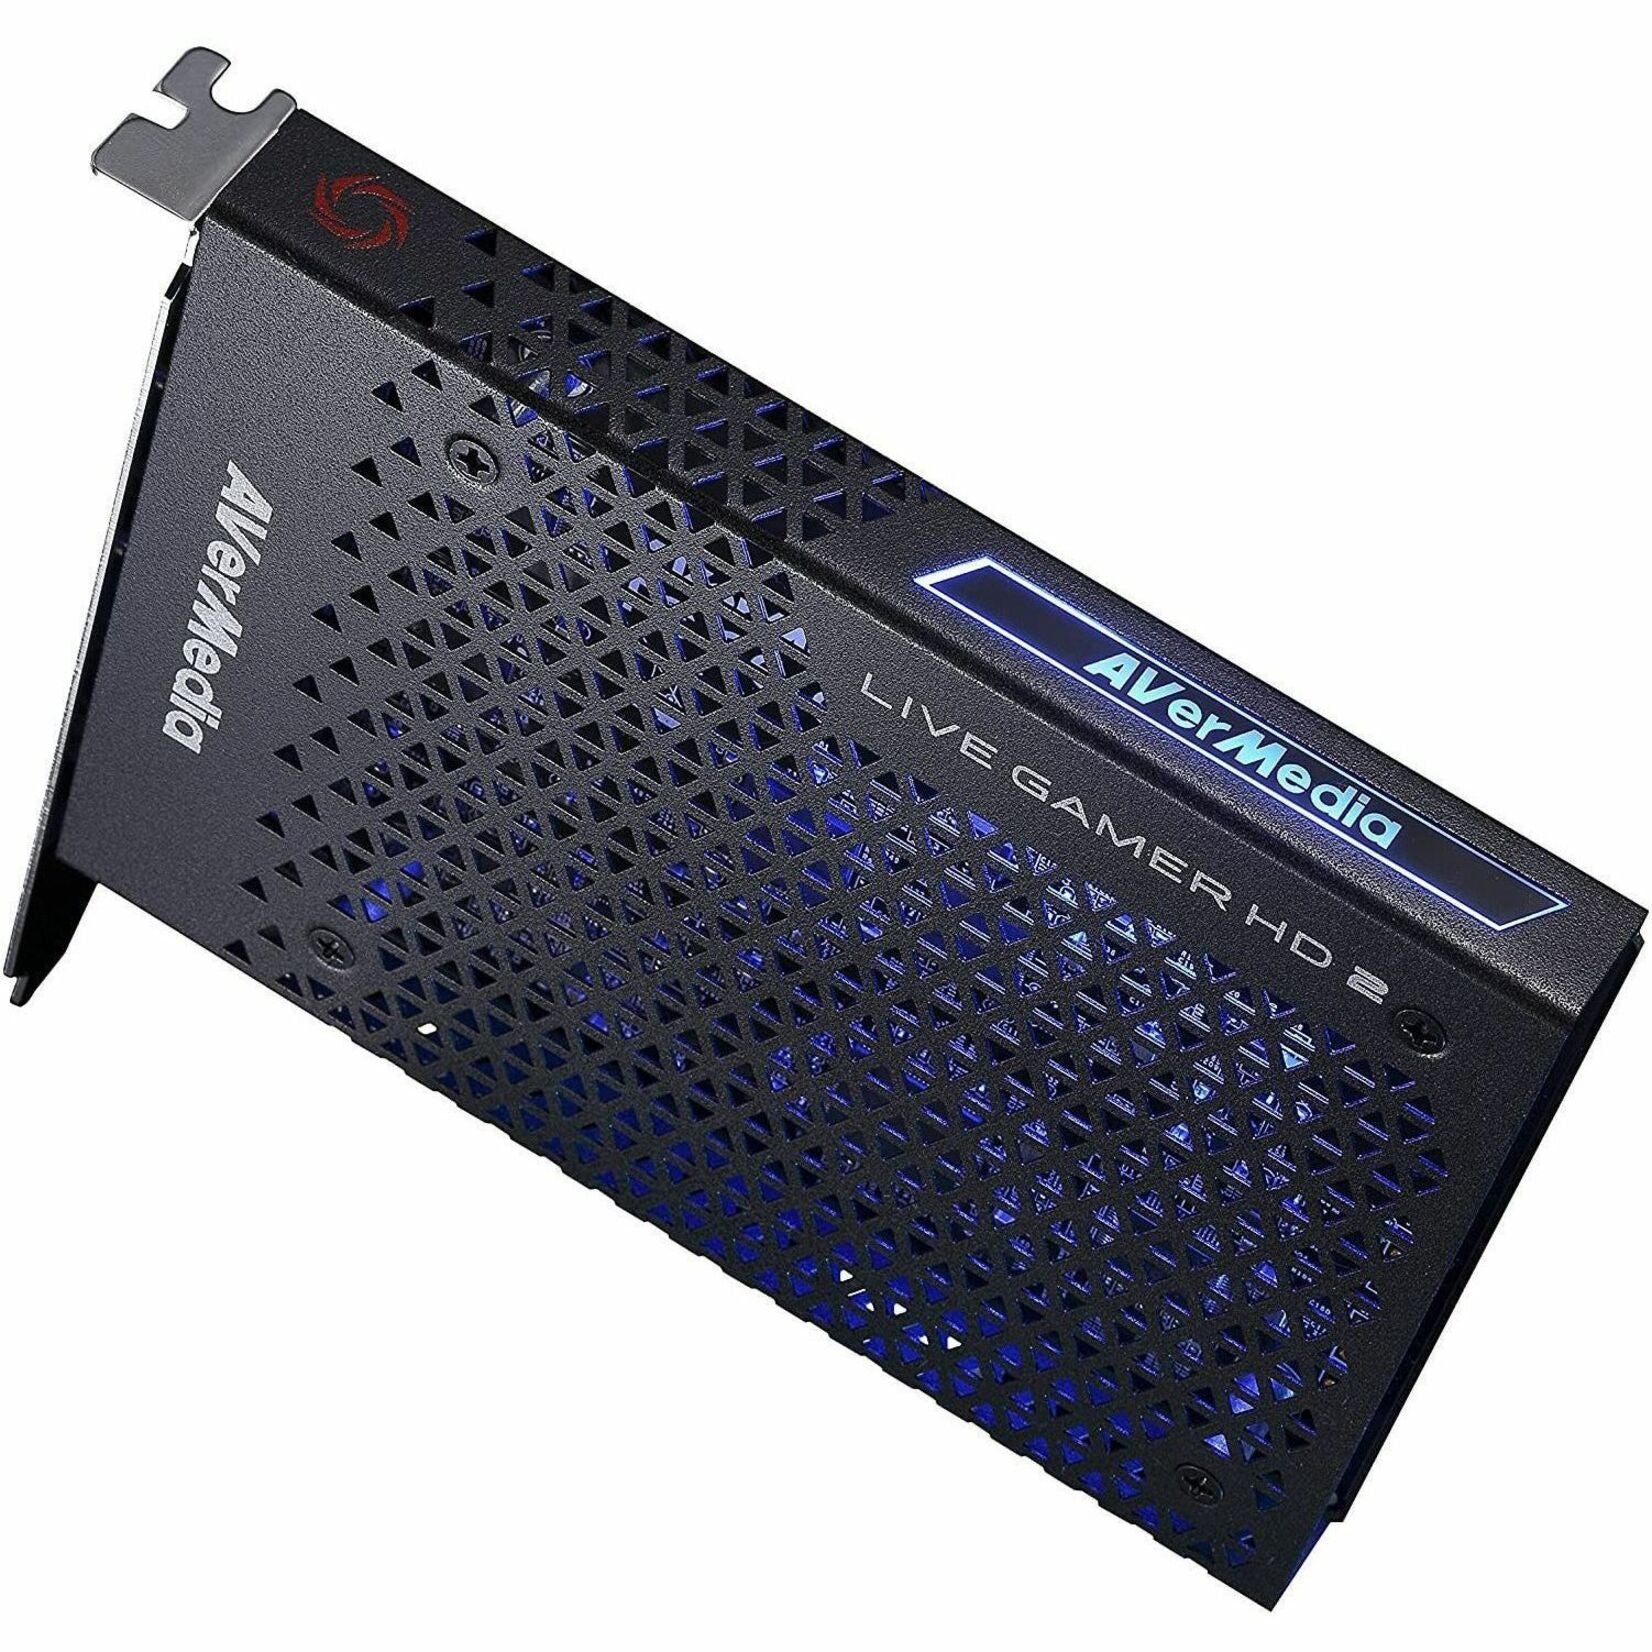 AVerMedia GC570 Live Gamer HD 2 Game Capturing Device, Video Game Recording, Video Streaming